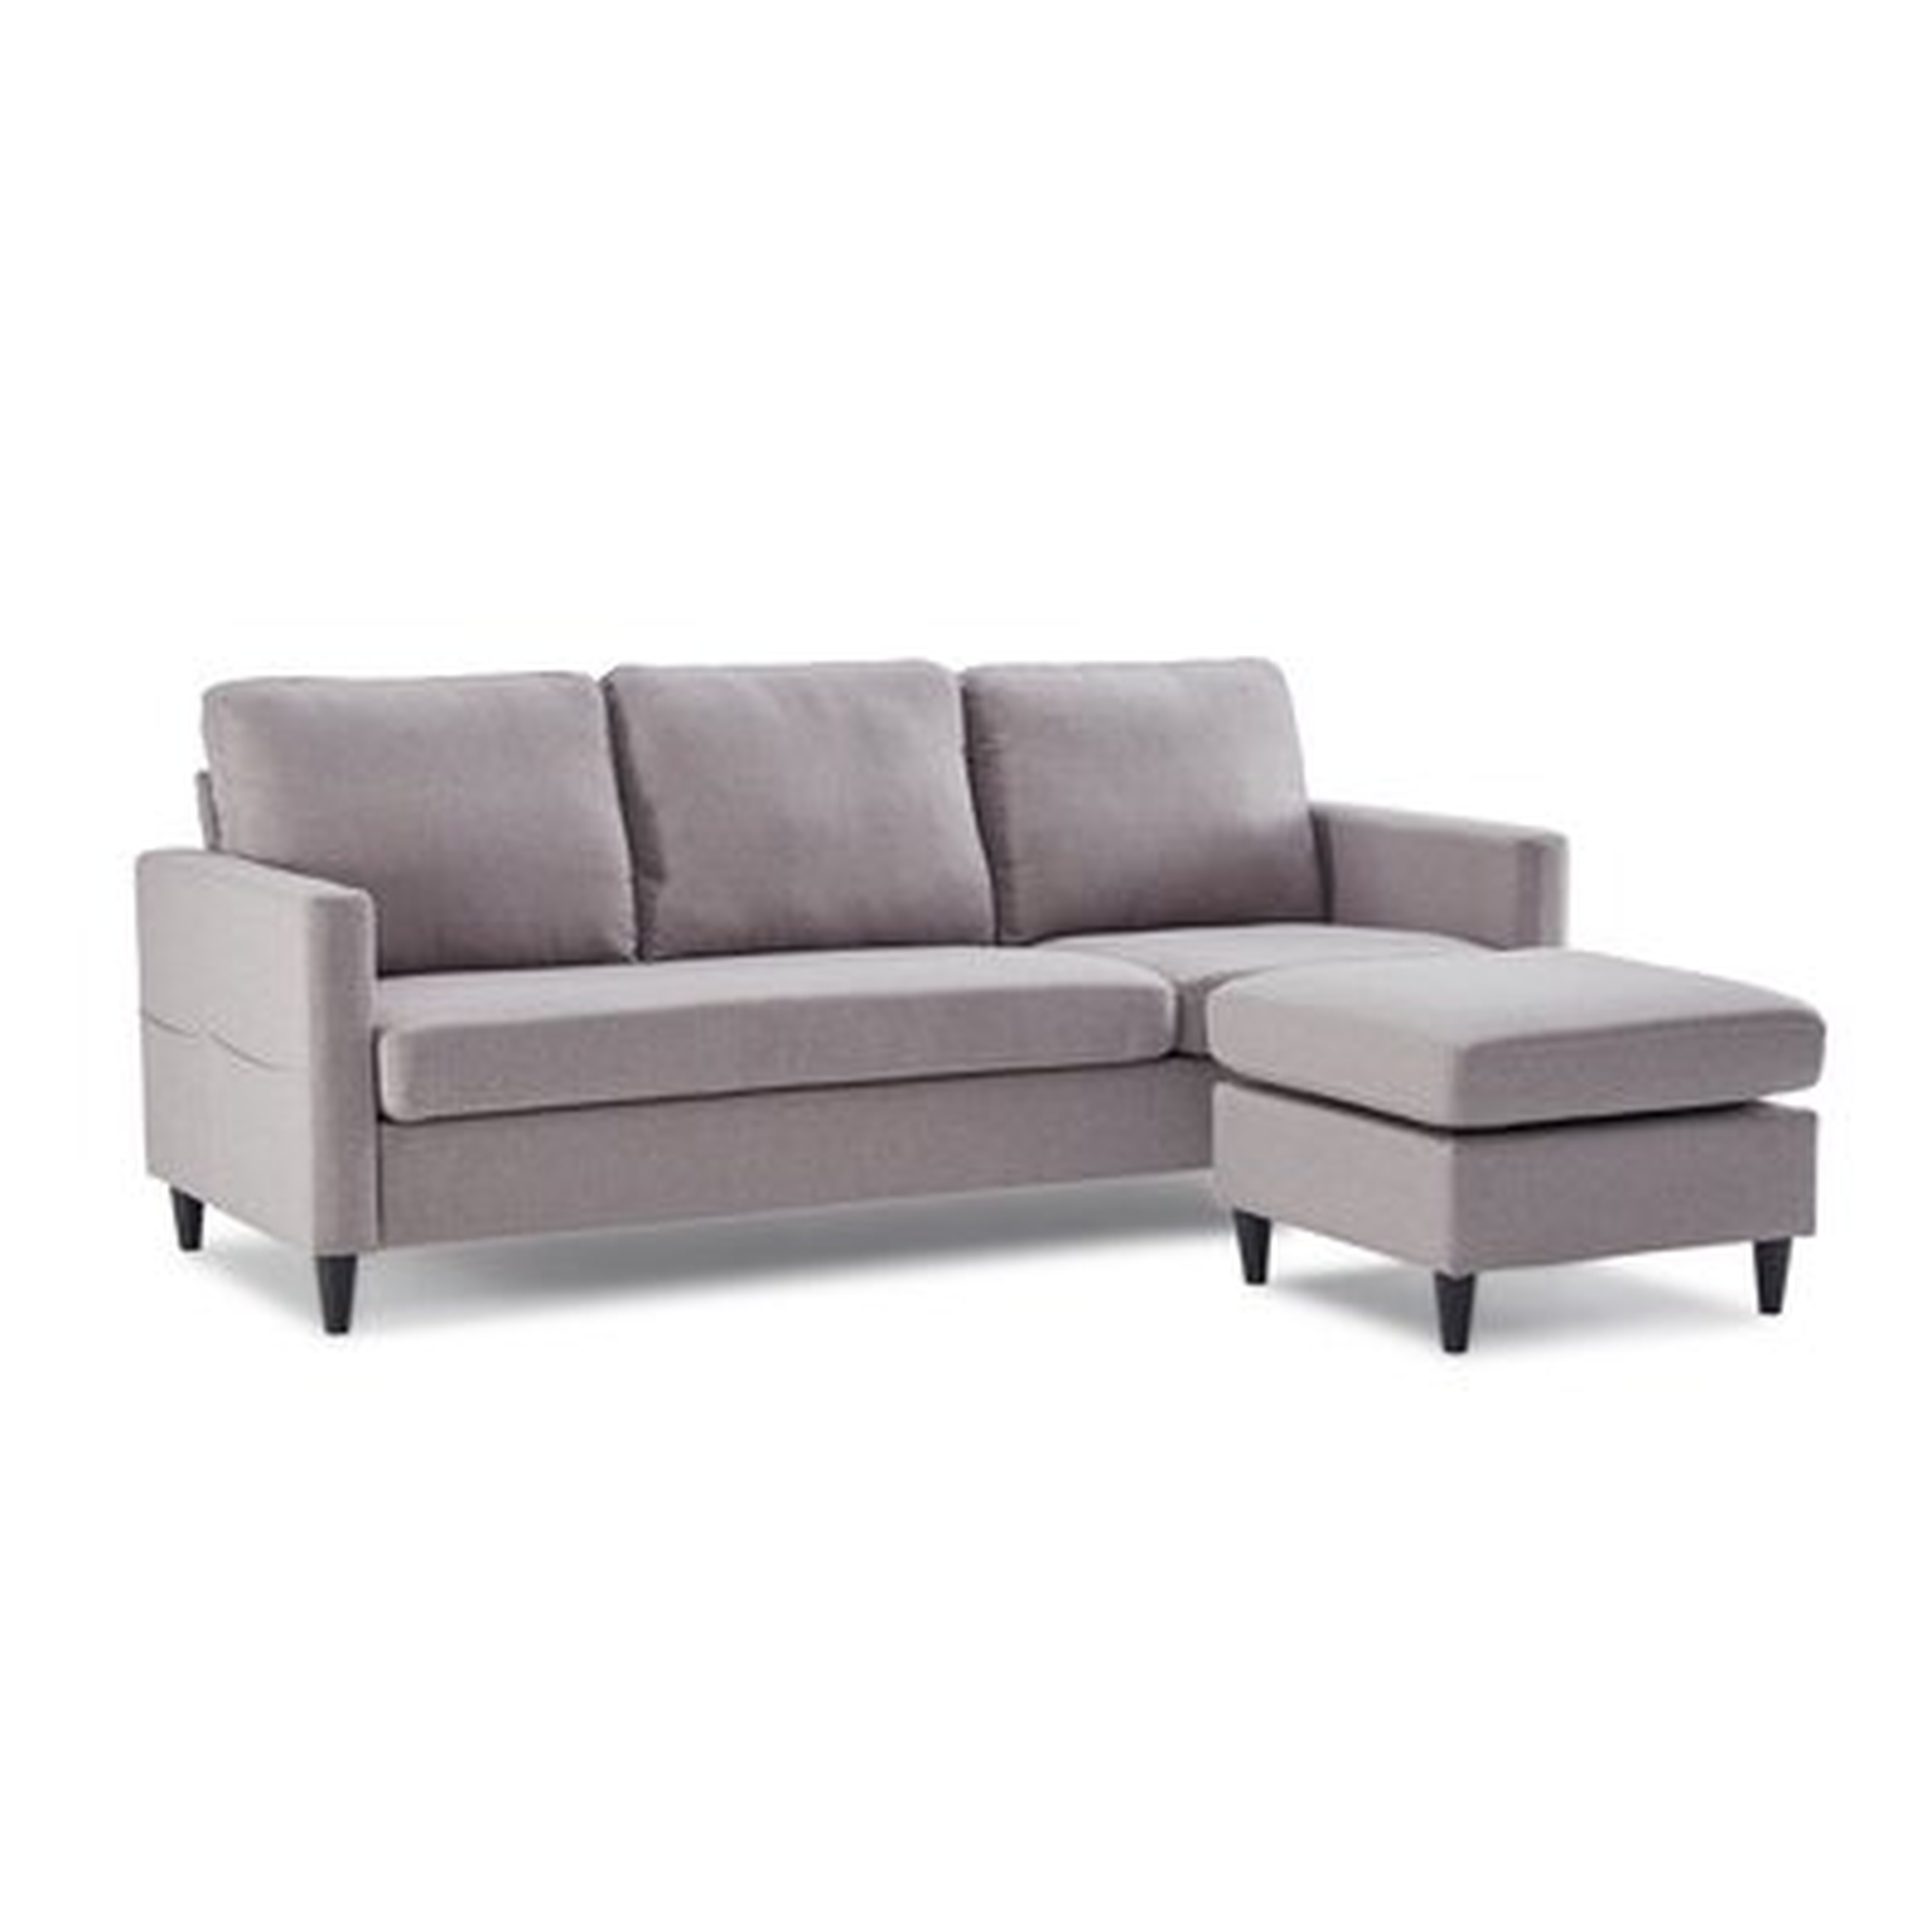 82.6" Wide Reversible Sectional Sofa & Chaise With Ottoman L-Shape 3-Seater Couch - Wayfair